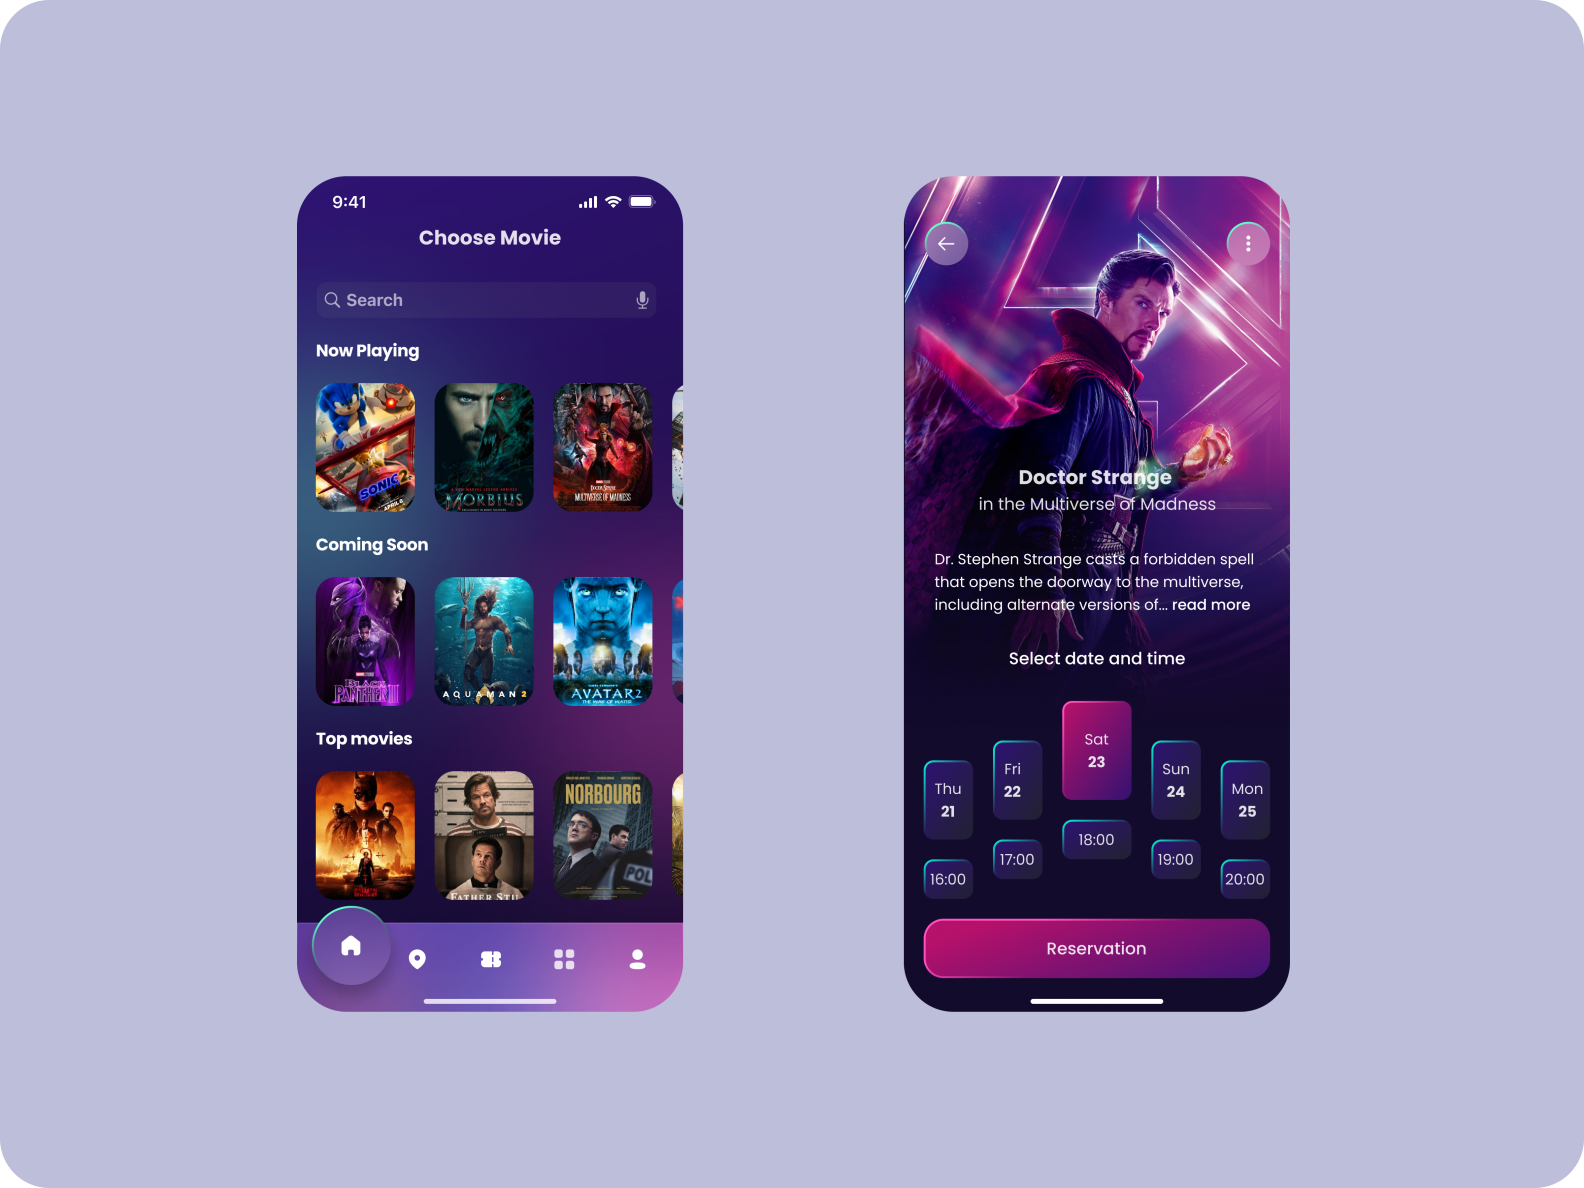 movie-ticket-booking-app-part-1-by-prathamesh-sawant-on-dribbble